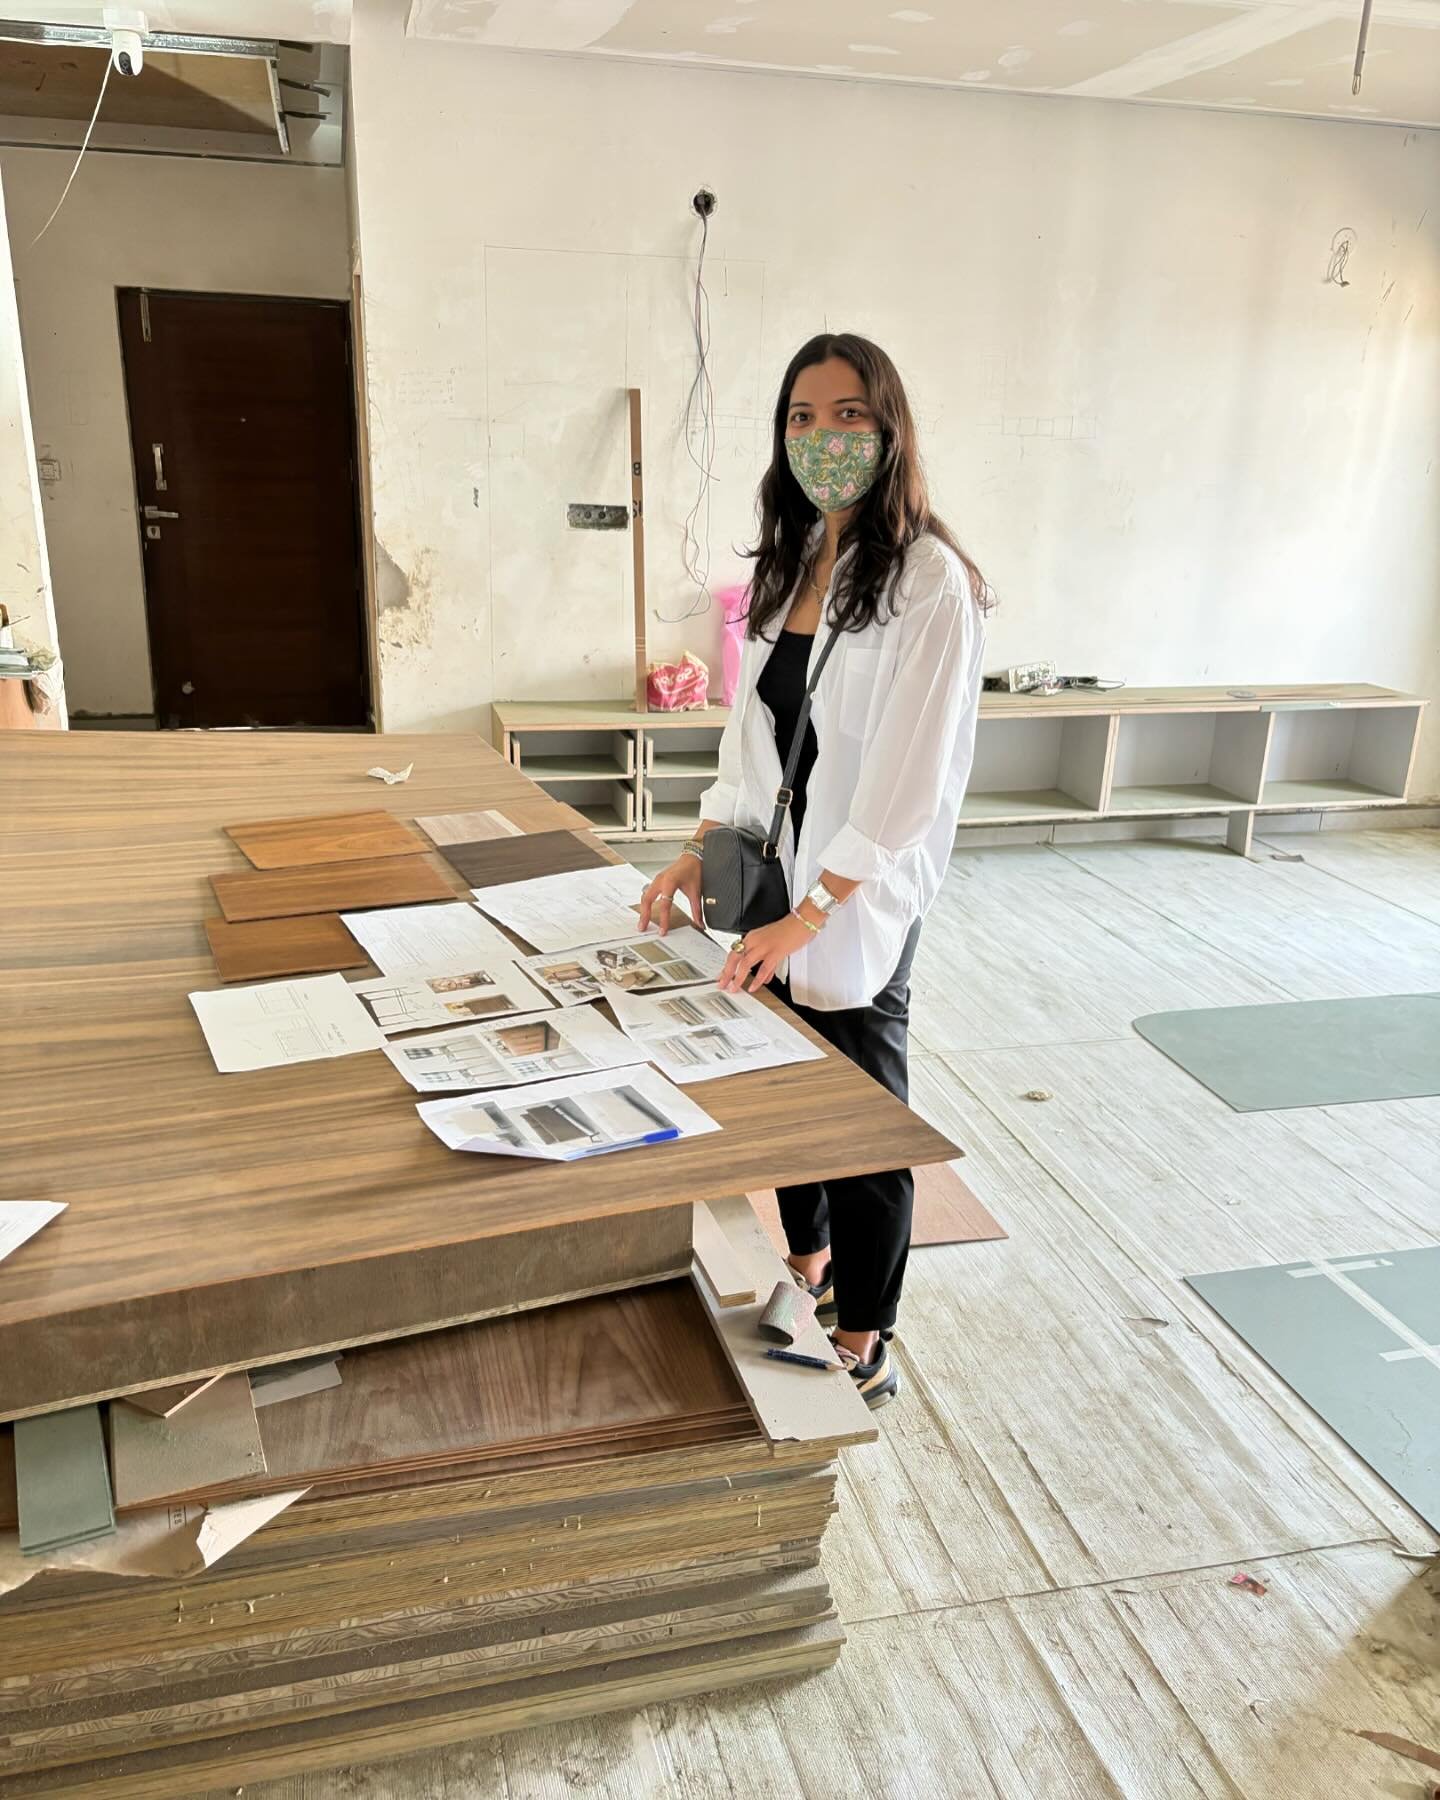 A round up of a visit to our residence site in Ahmedabad. 😊🤩
This visit was all about the final aspects of the material selections. Putting together the final set of furniture detailing, soft furnishings with the other veneer finishes and textures,